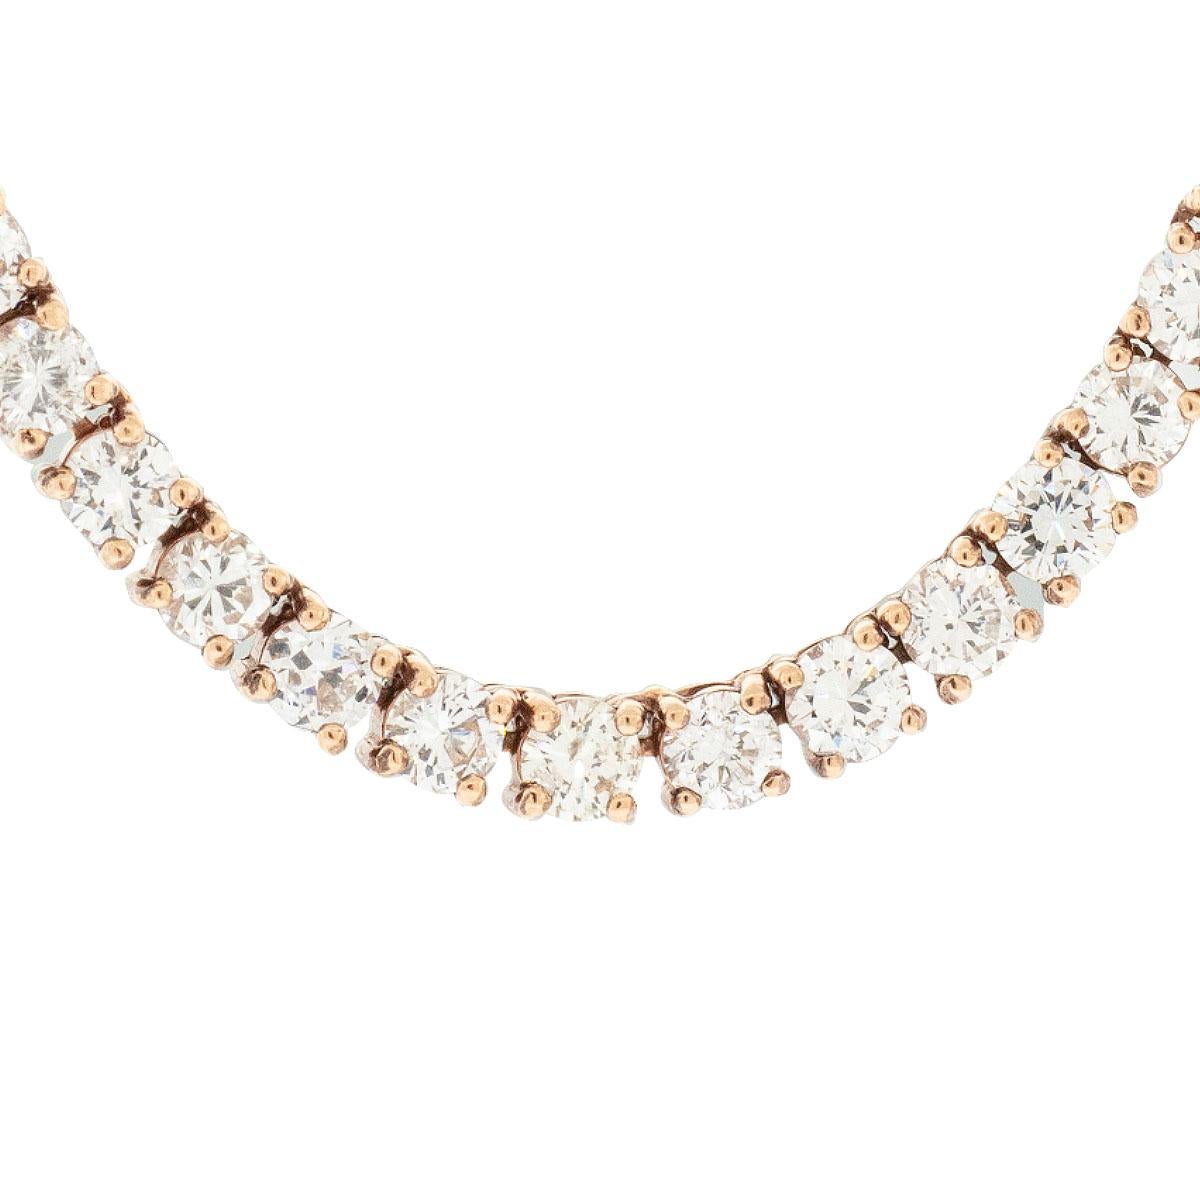 14k Rose Gold 14ctw Round Diamond Tennis 22 inch Necklace

When it comes to timeless sophistication and pure opulence, few pieces of jewelry can match the allure of a diamond tennis necklace. And when that necklace is crafted from the warm blush of